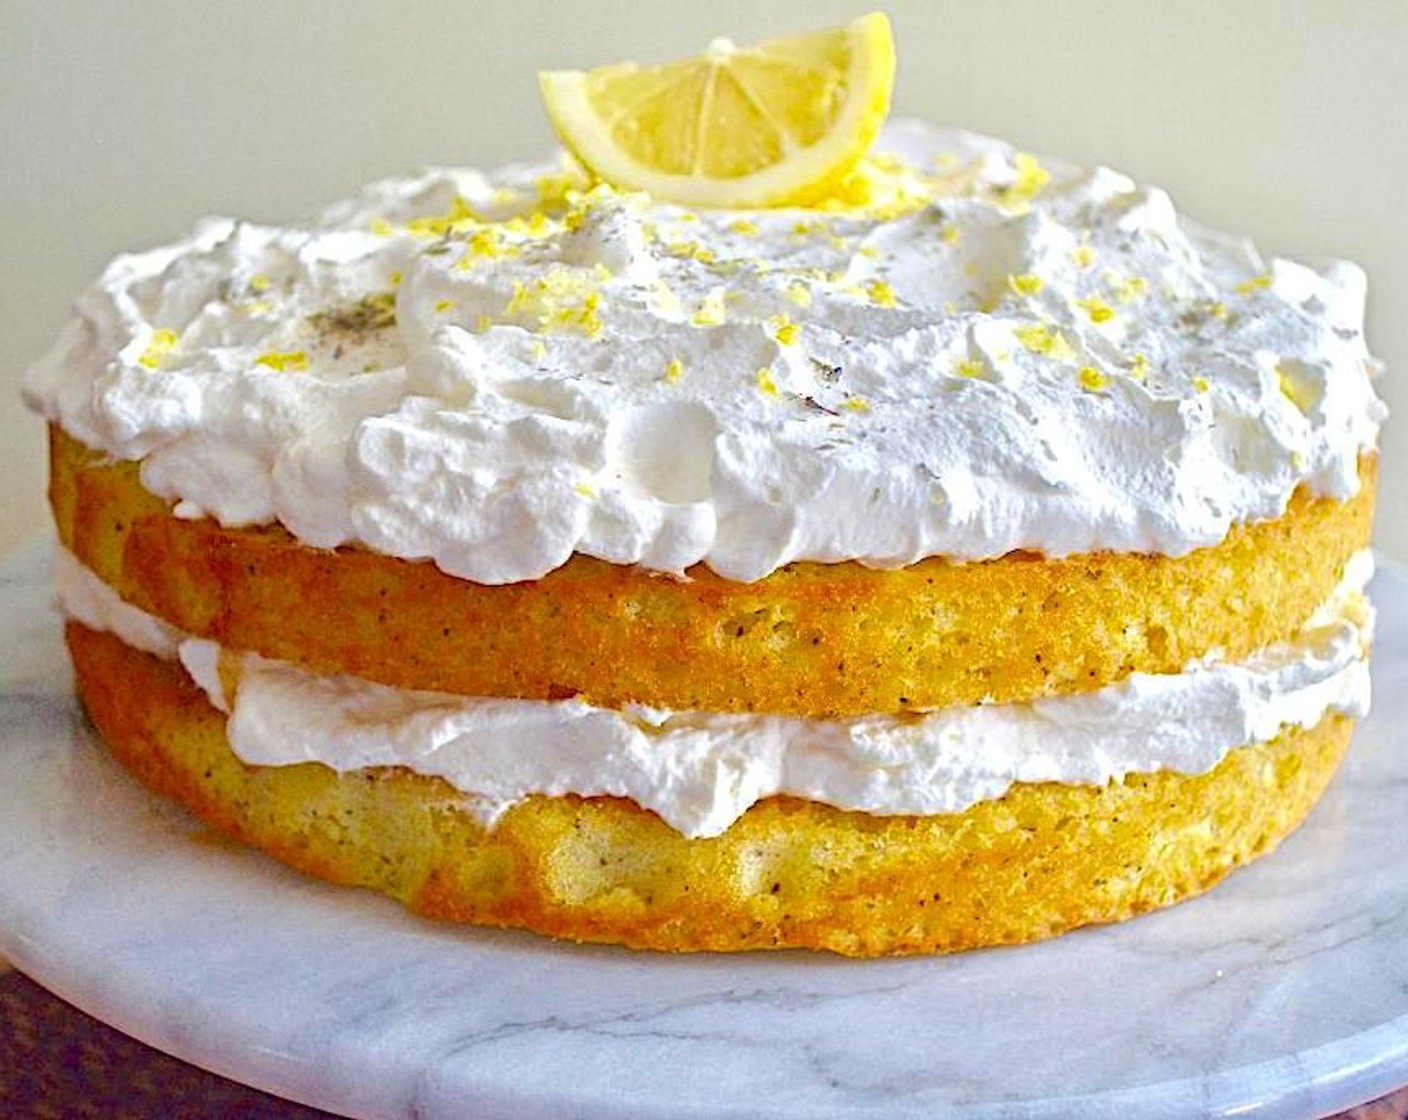 step 12 Place the second layer on flat side down. Poke holes and drizzle the remaining syrup into the sponge. Spread the remaining whipped cream on top, then sprinkle remaining 1 1/2 teaspoon of lemon zest and Ground Lavender (1 tsp) on top. Serve and enjoy!